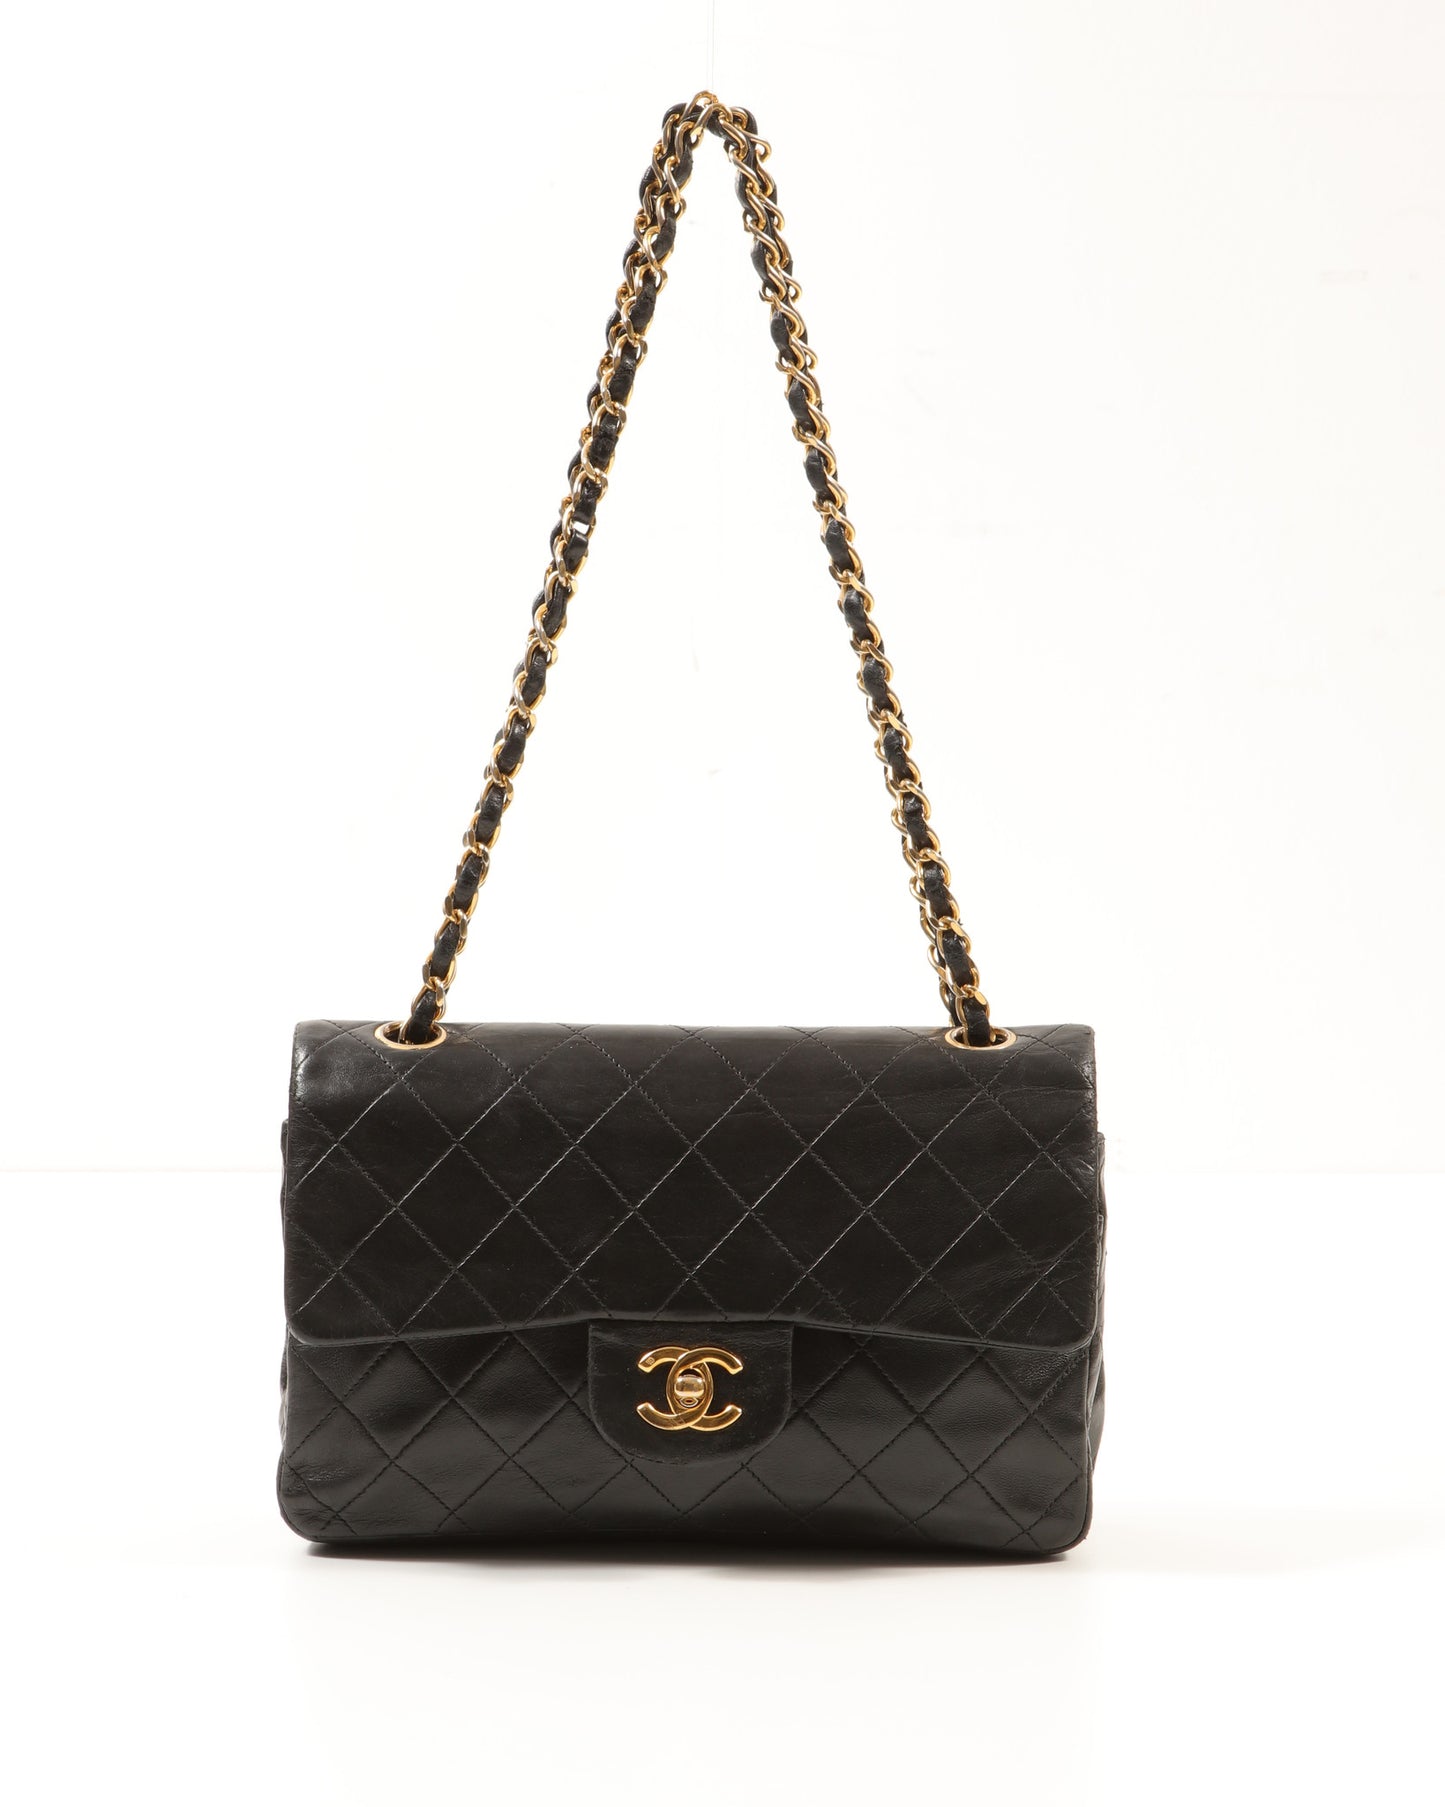 Chanel Vintage Black Lambskin Small Classic Double Flap Bag GHW